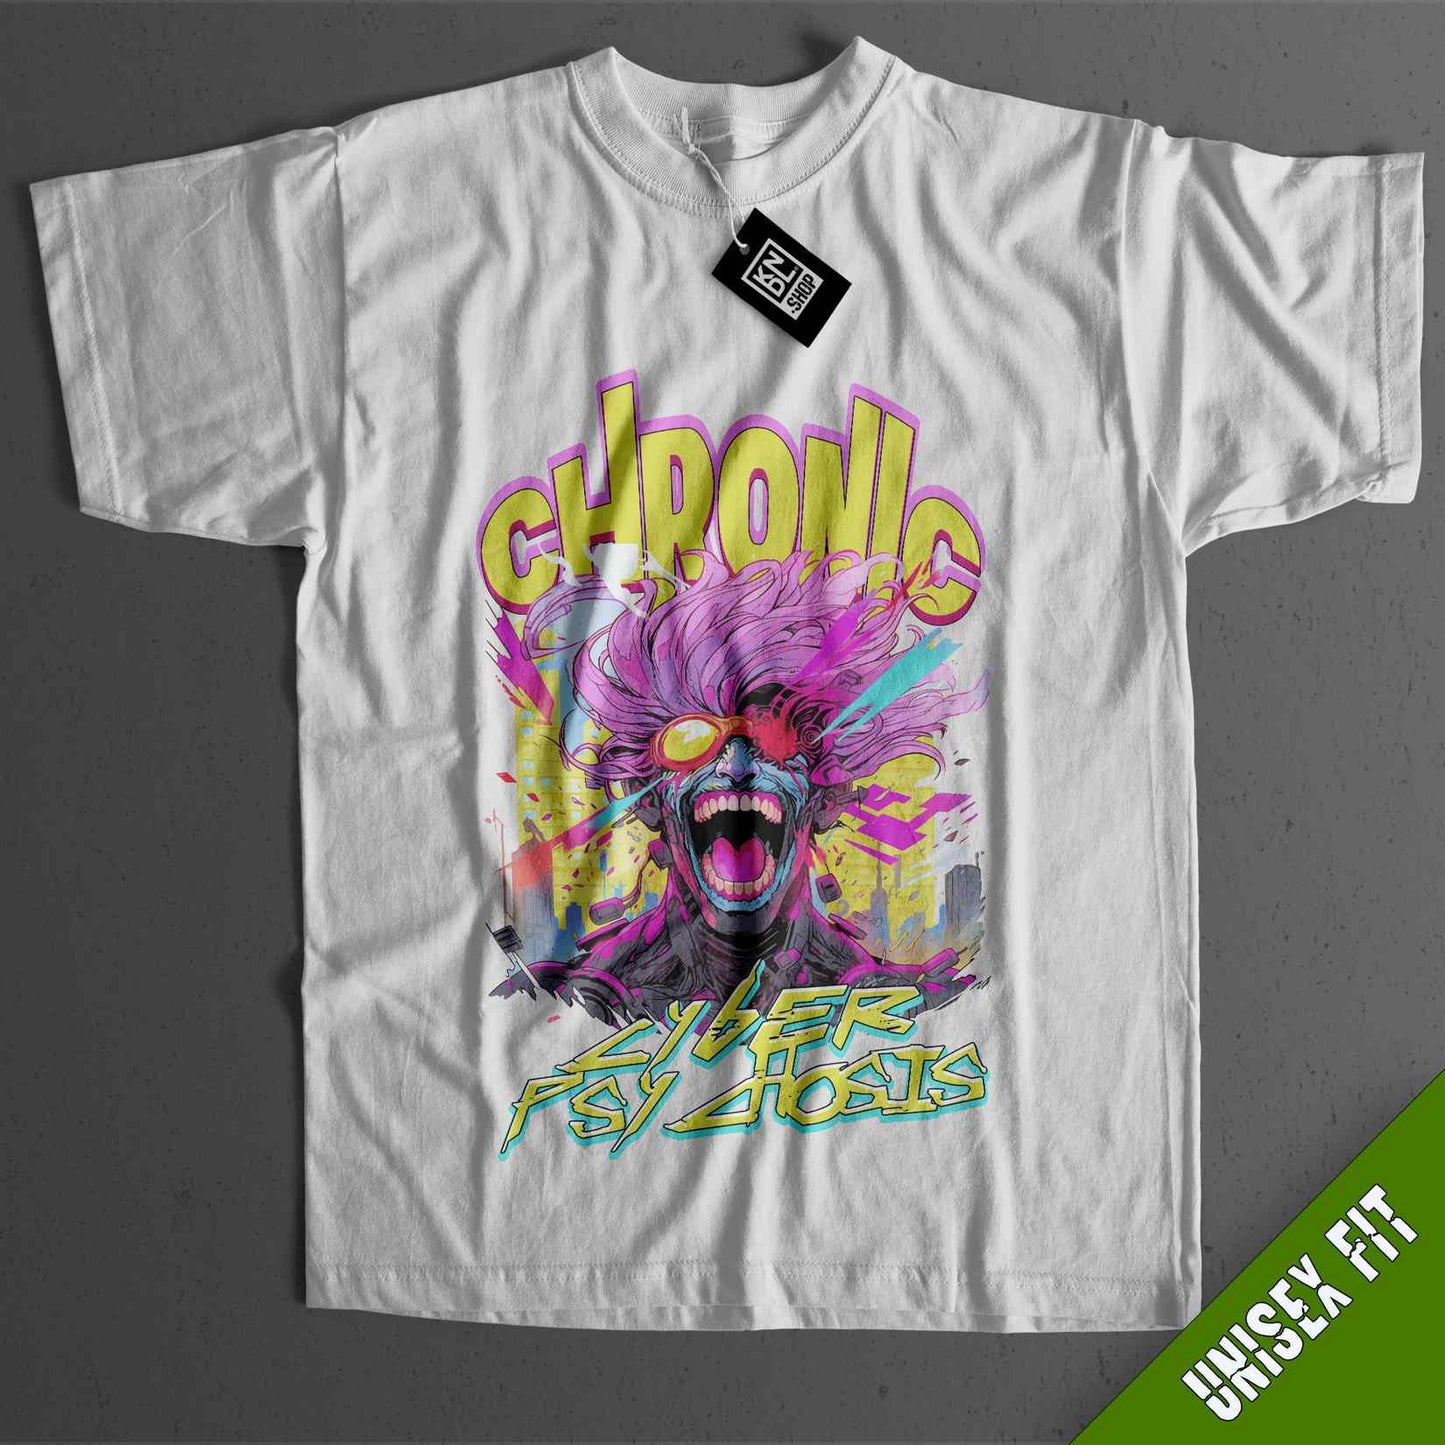 a white t - shirt with an image of a clown on it